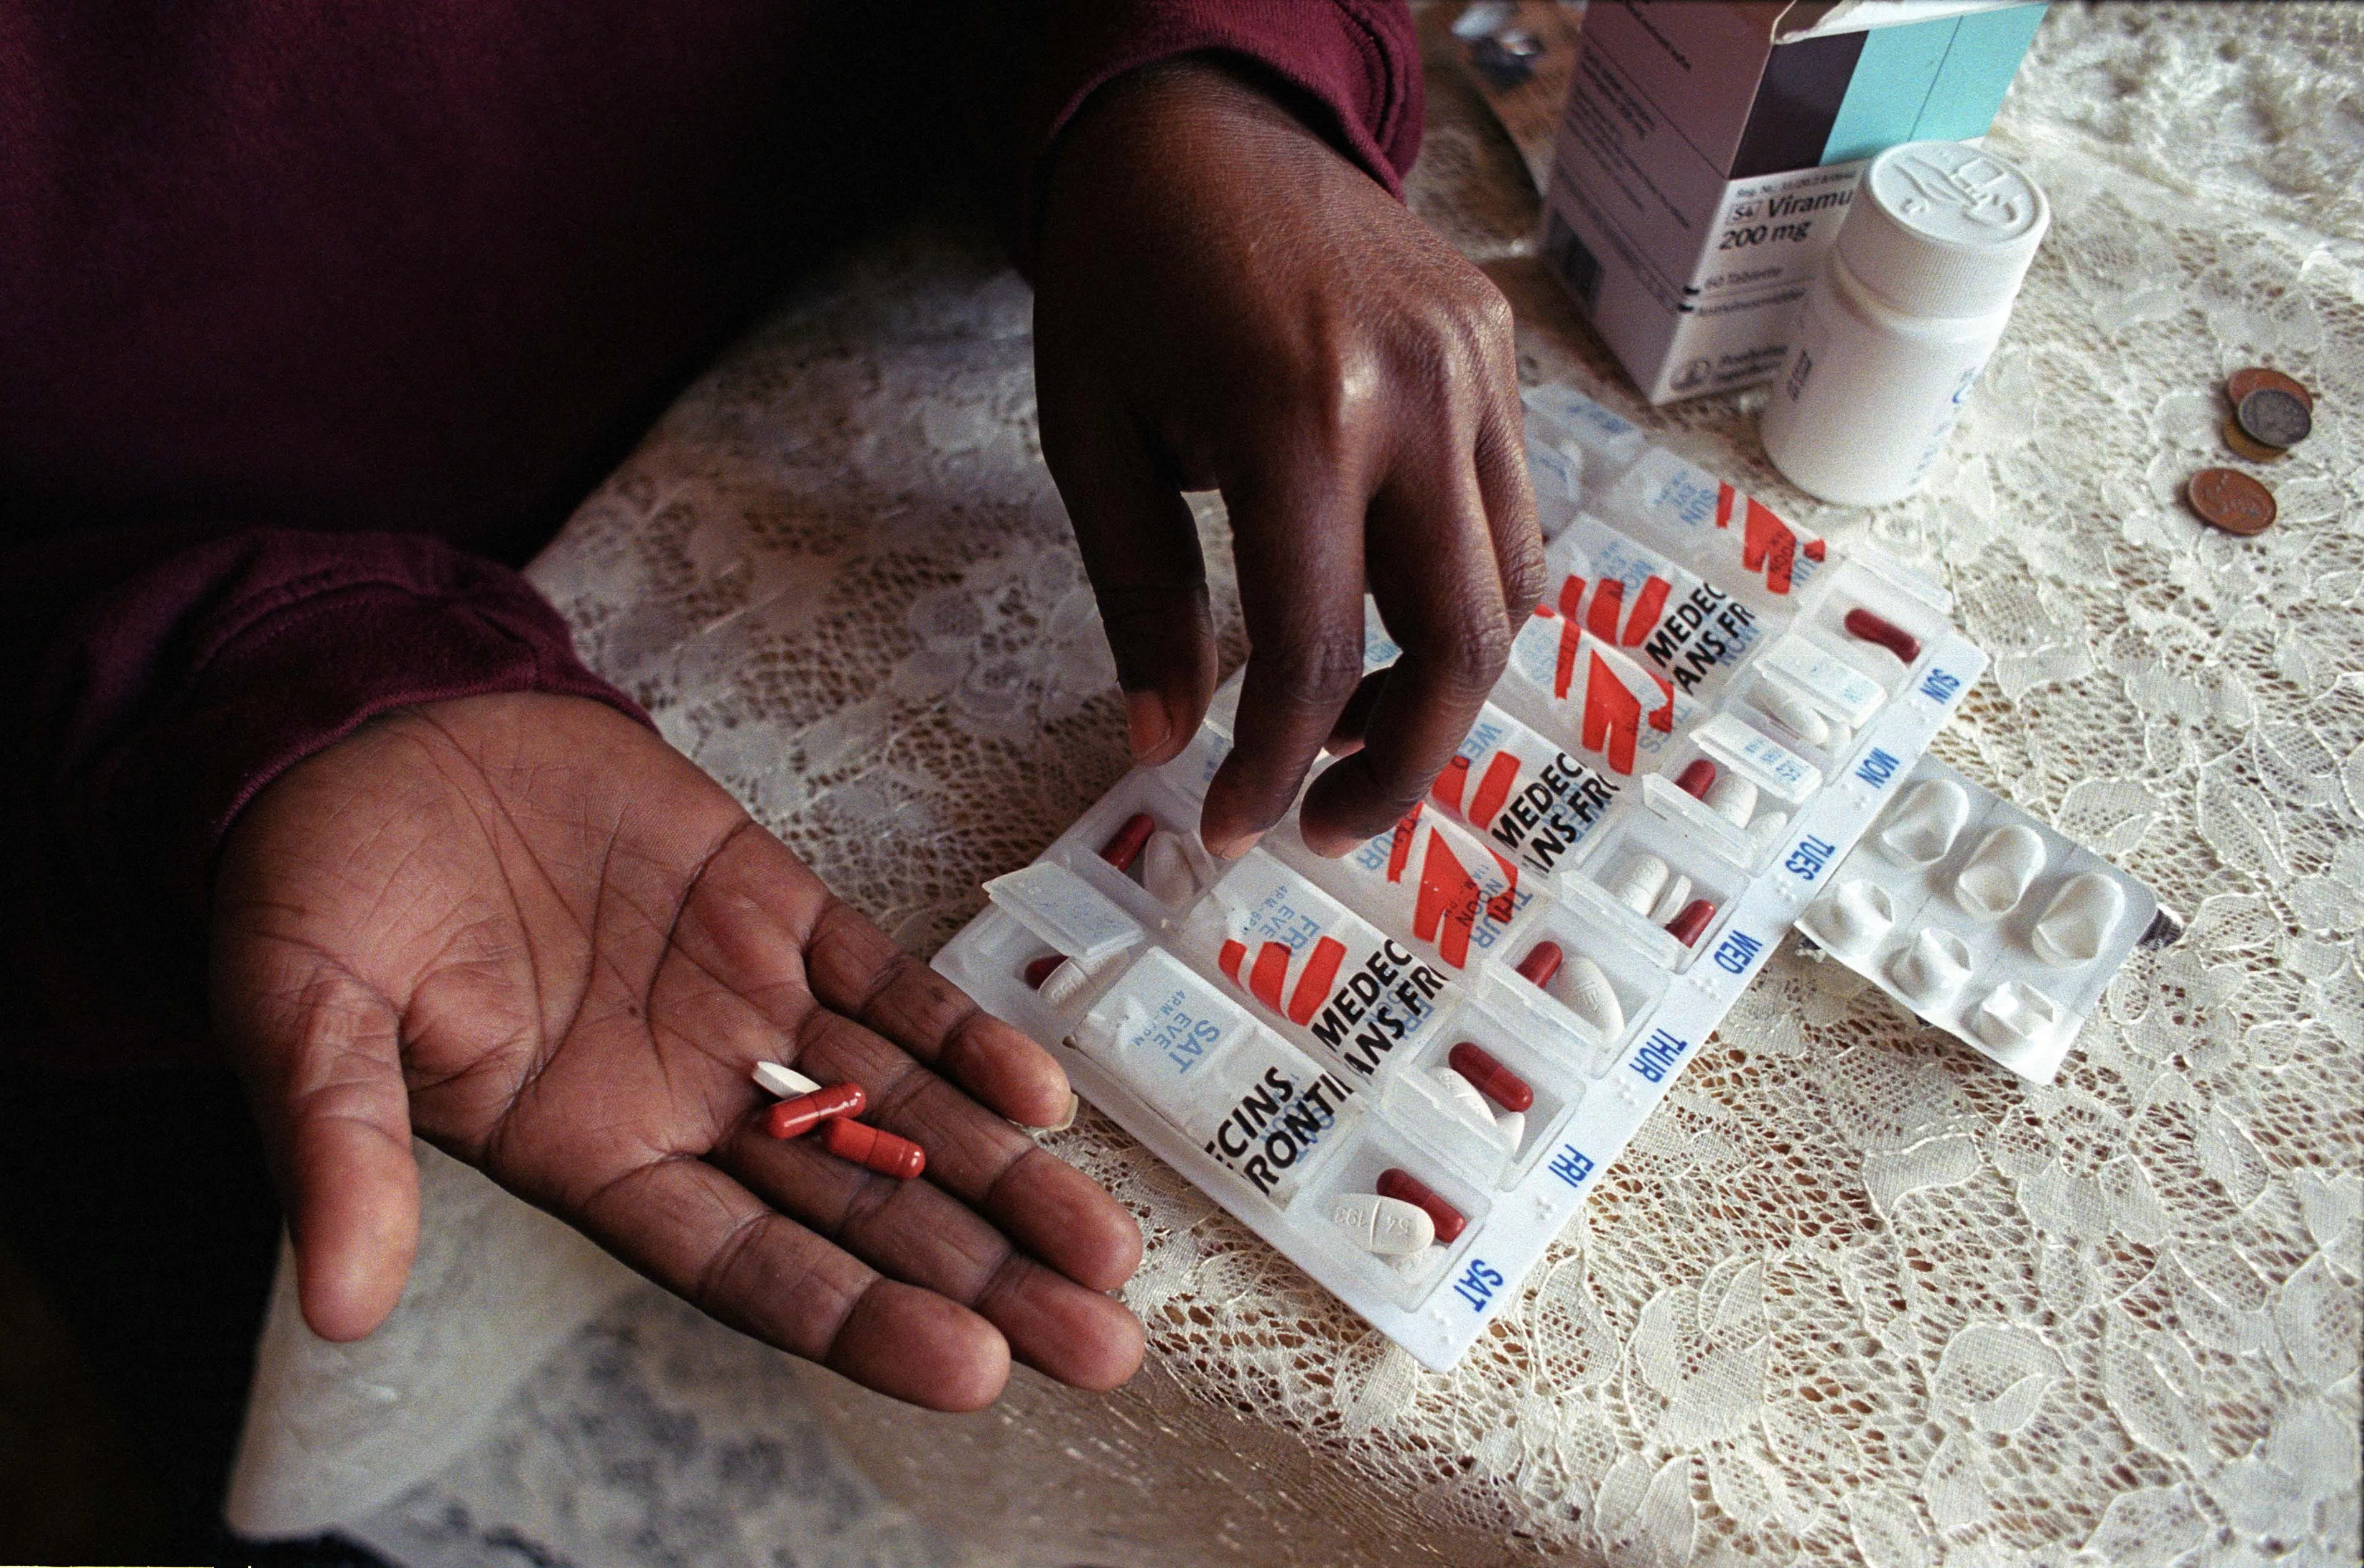 MSF operates a rural HIV/AIDS program in Lusikisiki, in the Eastern Cape province, one of the country's poorest areas. The program has tested more than 600 people for the virus each month and has demonstrated an HIV-positive prevalence of 30 to 40 percent. MSF manages opportunistic infections in 11 rural clinics and in the district hospital and began offering ARV treatment in the clinics in November 2003.